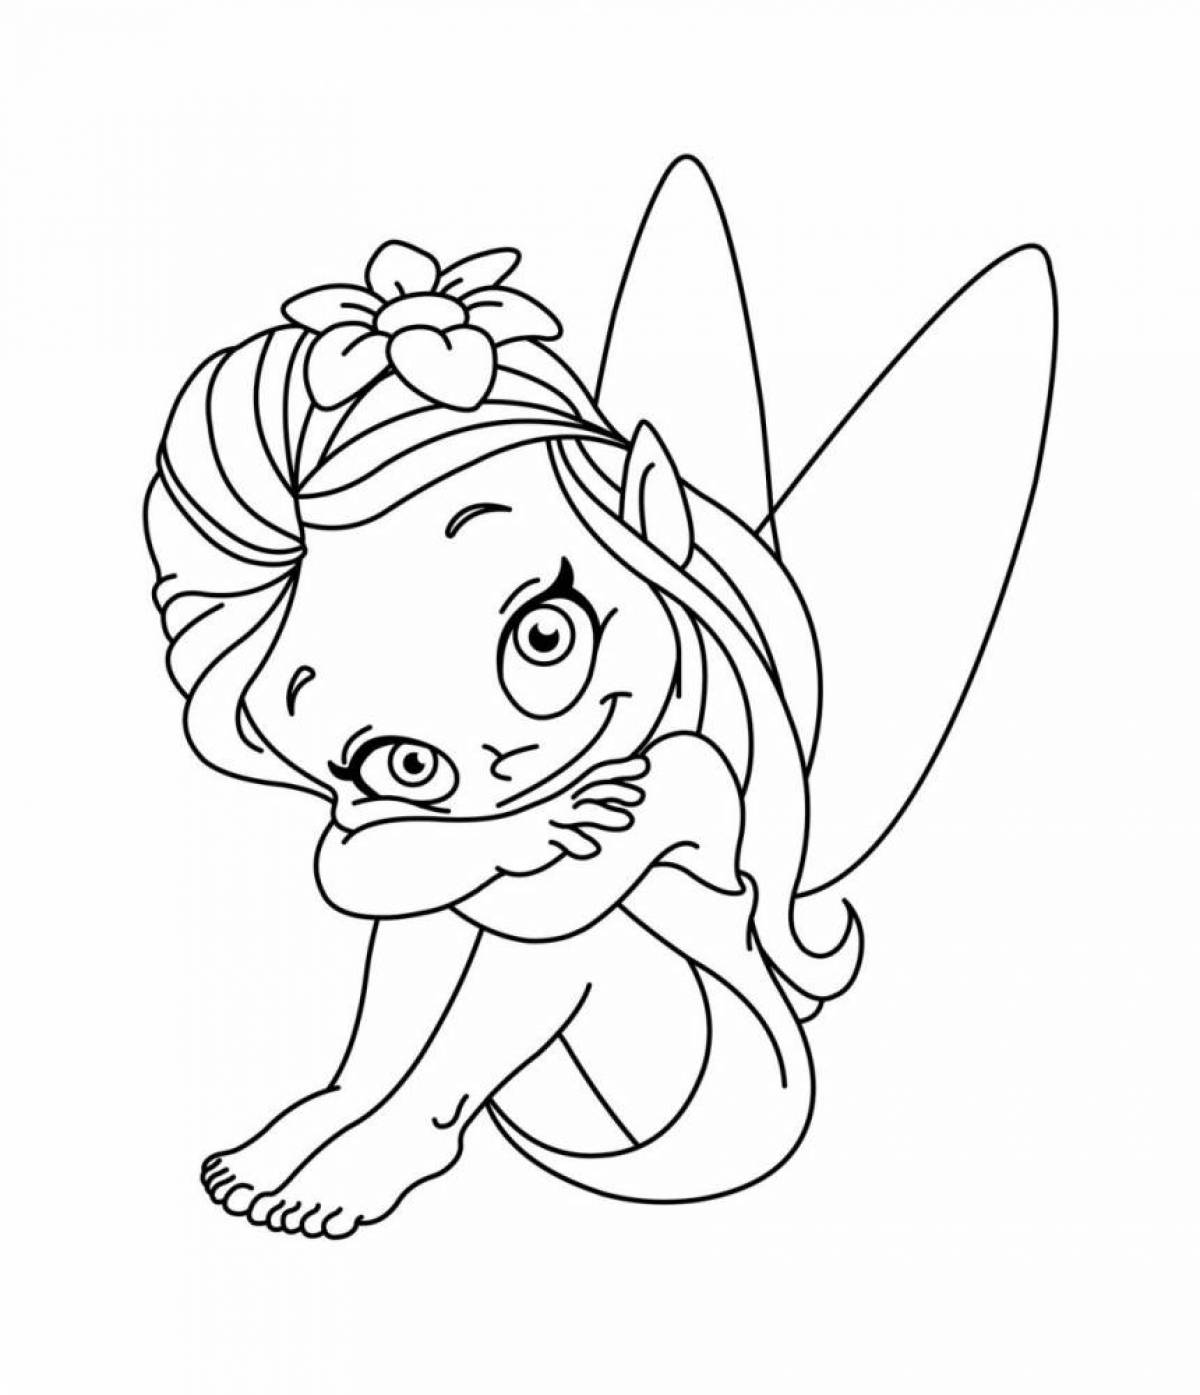 Incredible little girls coloring book